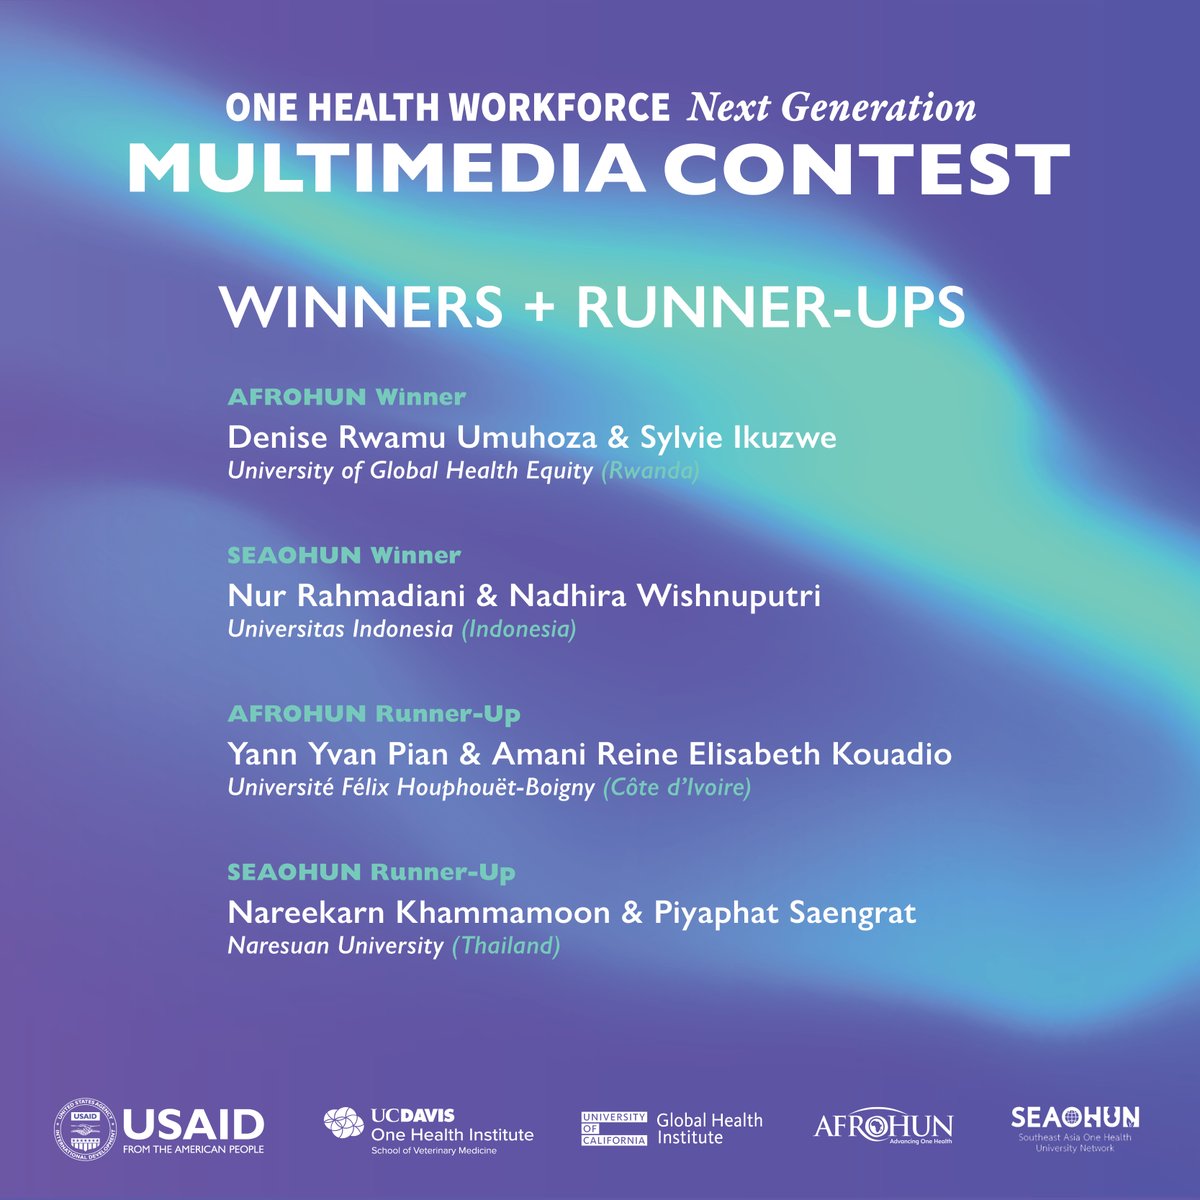 #OneHealthDay: This fall, the One Health Workforce-Next Generation project hosted an inaugural One Health Multimedia contest. We are pleased to share the winning and honorable mention submissions: linktr.ee/onehealthucd